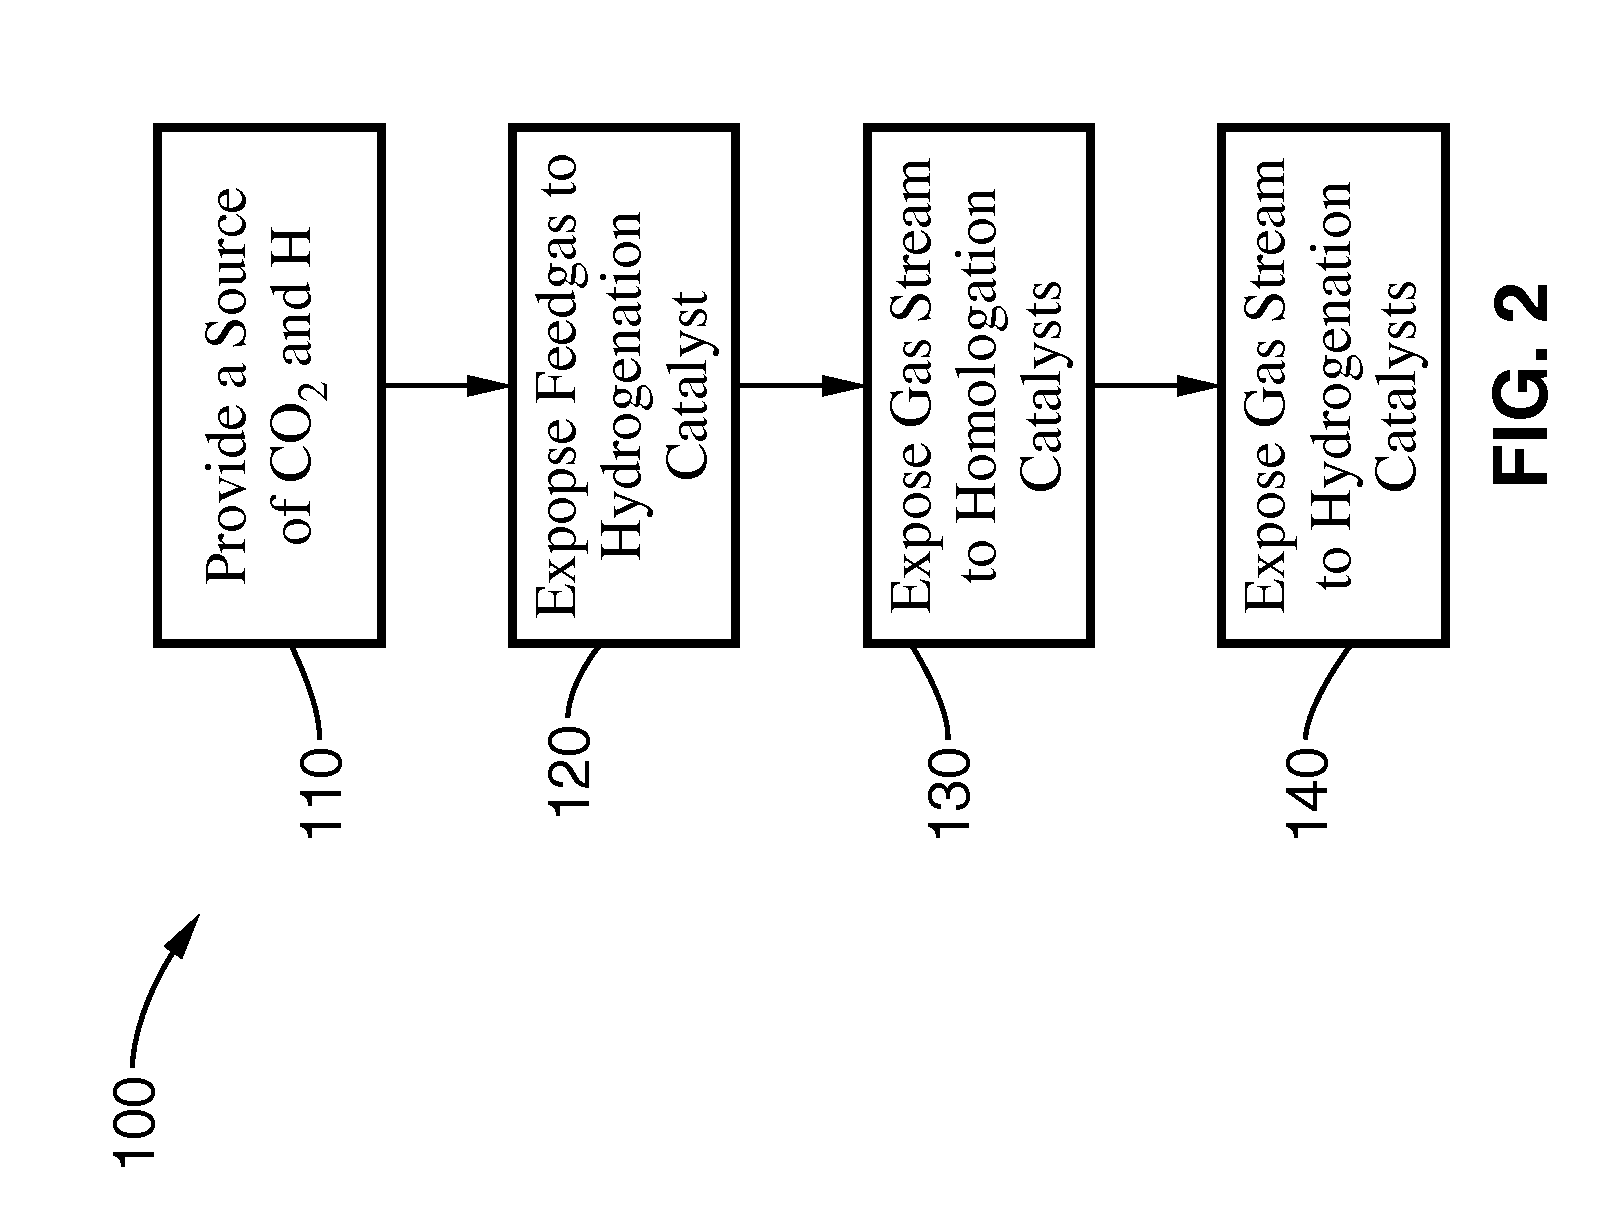 Combination catalytic process for producing ethanol from synthesis gas